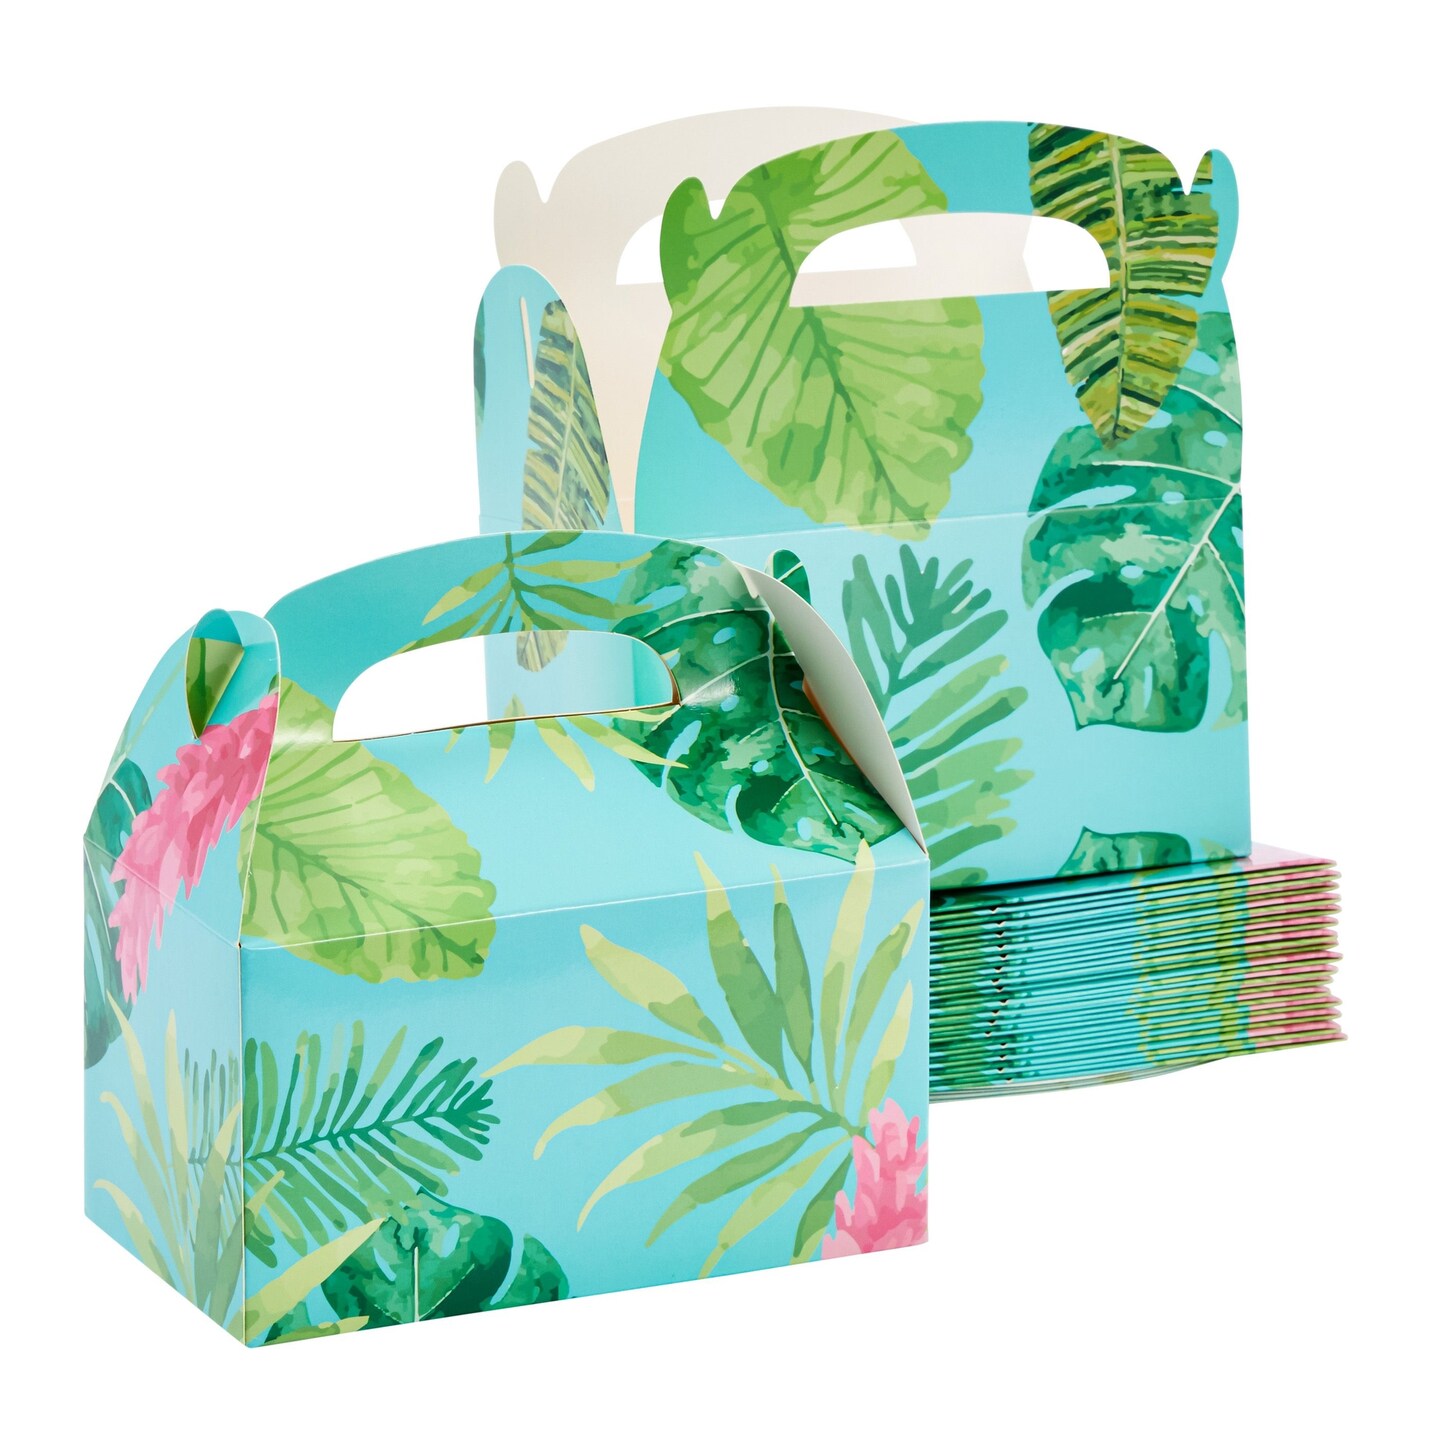 24 Pack Luau Tropical Party Favor Boxes for Kids Birthday Decorations, Hawaiian Themed Gable Gift Box Set for Summer Pool Party, Floral Design (6 x 3 x 3 Inches)